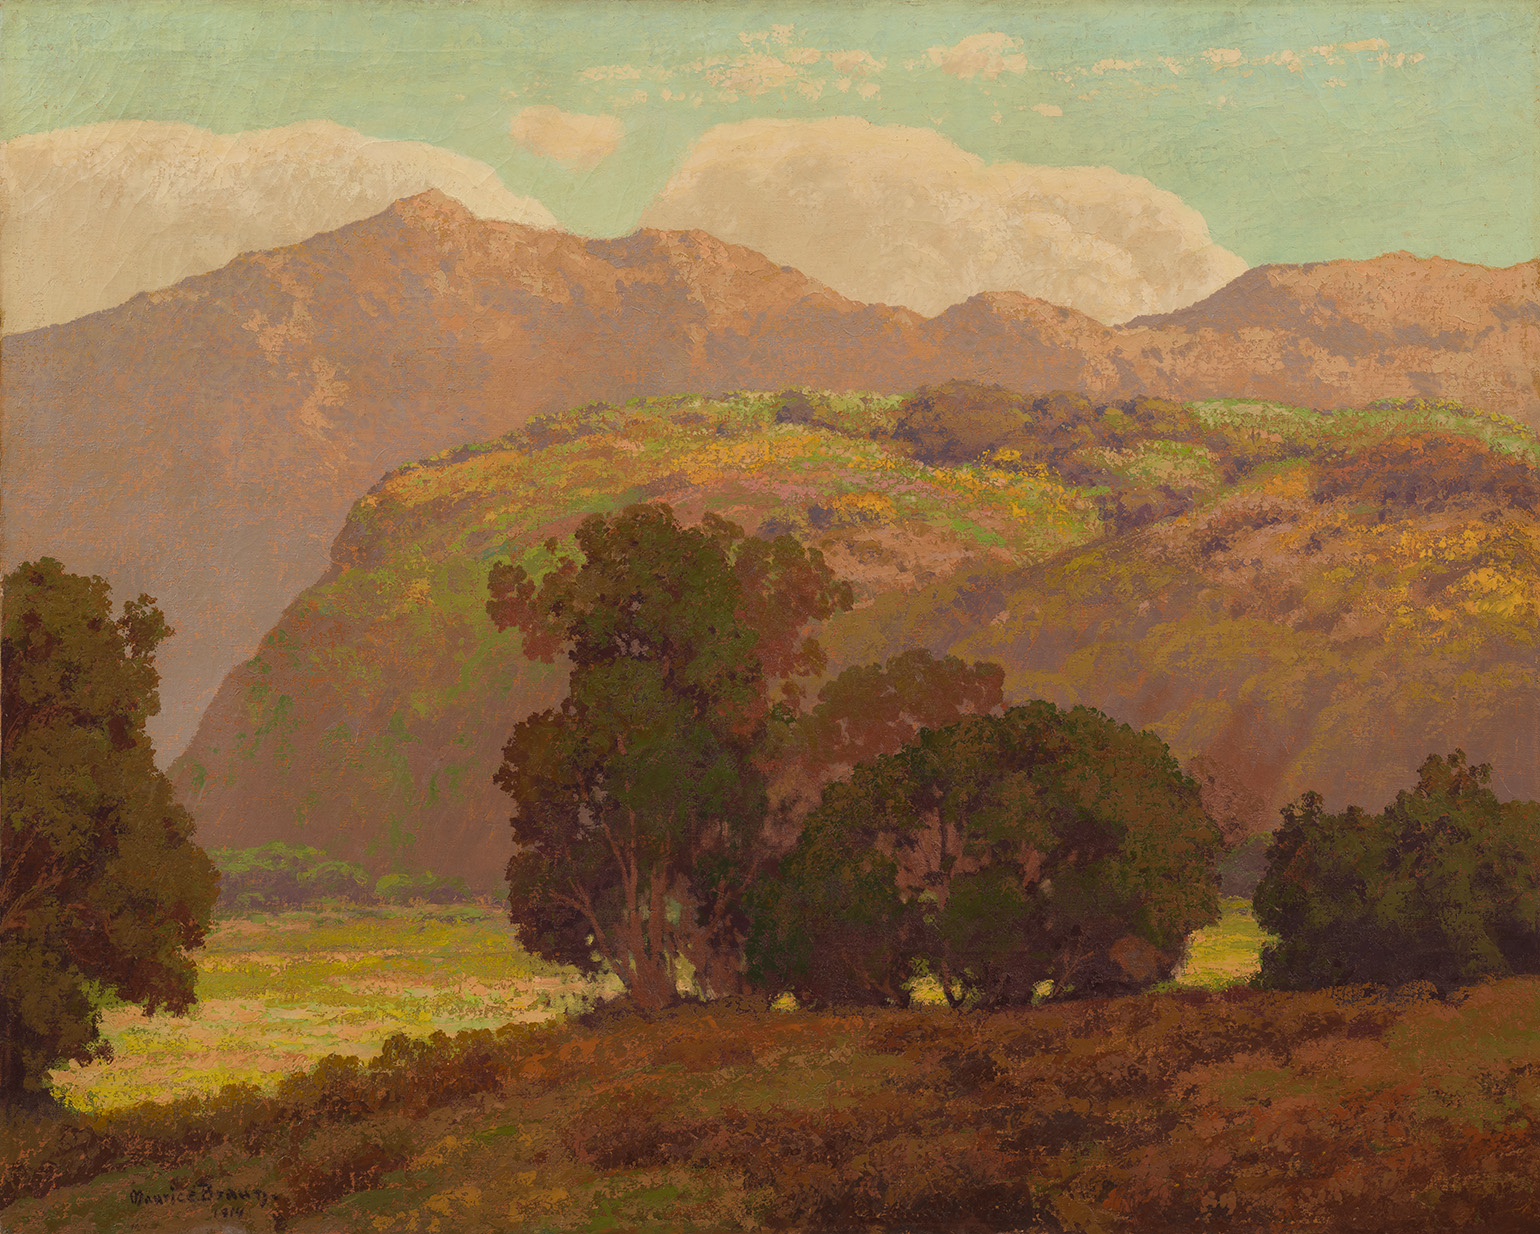 Maurice Braun, California Hills, 1914, Oil on canvas , 40 x 53 in. UC Irvine Institute and Museum of California Art, Gift of The Irvine Museum